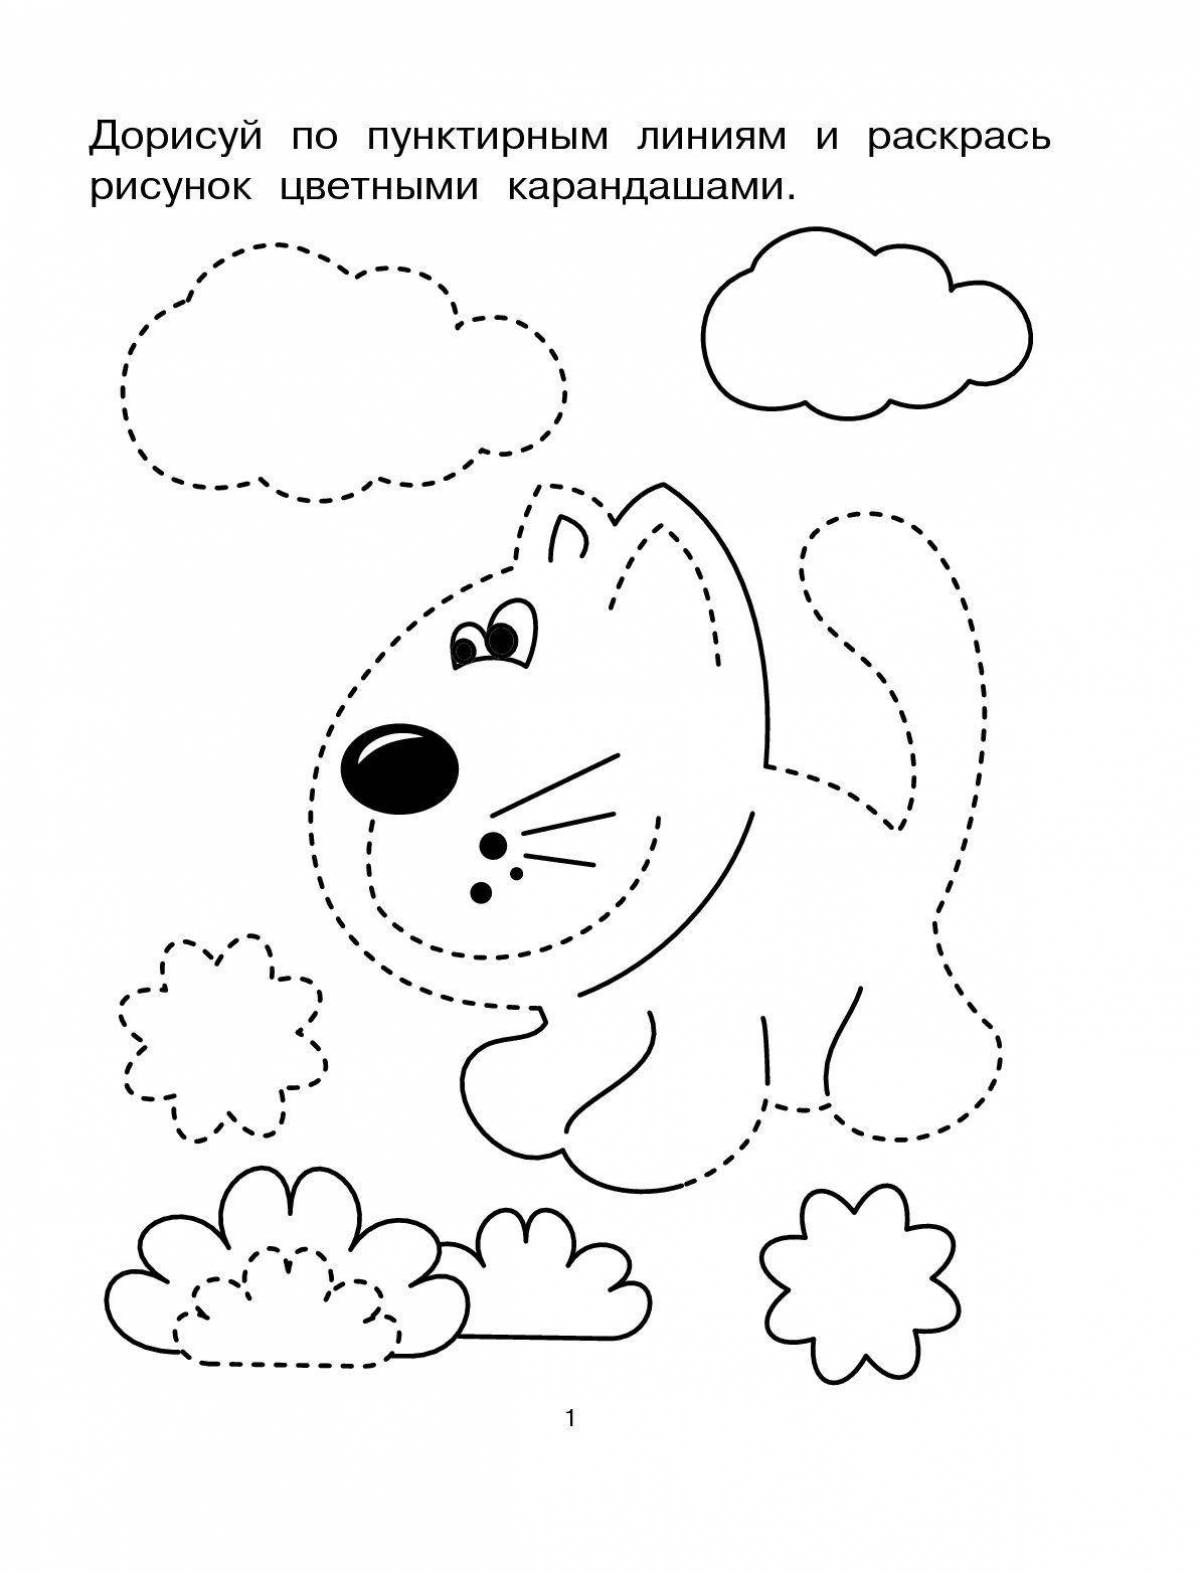 A joyful coloring book for children aged 4-5